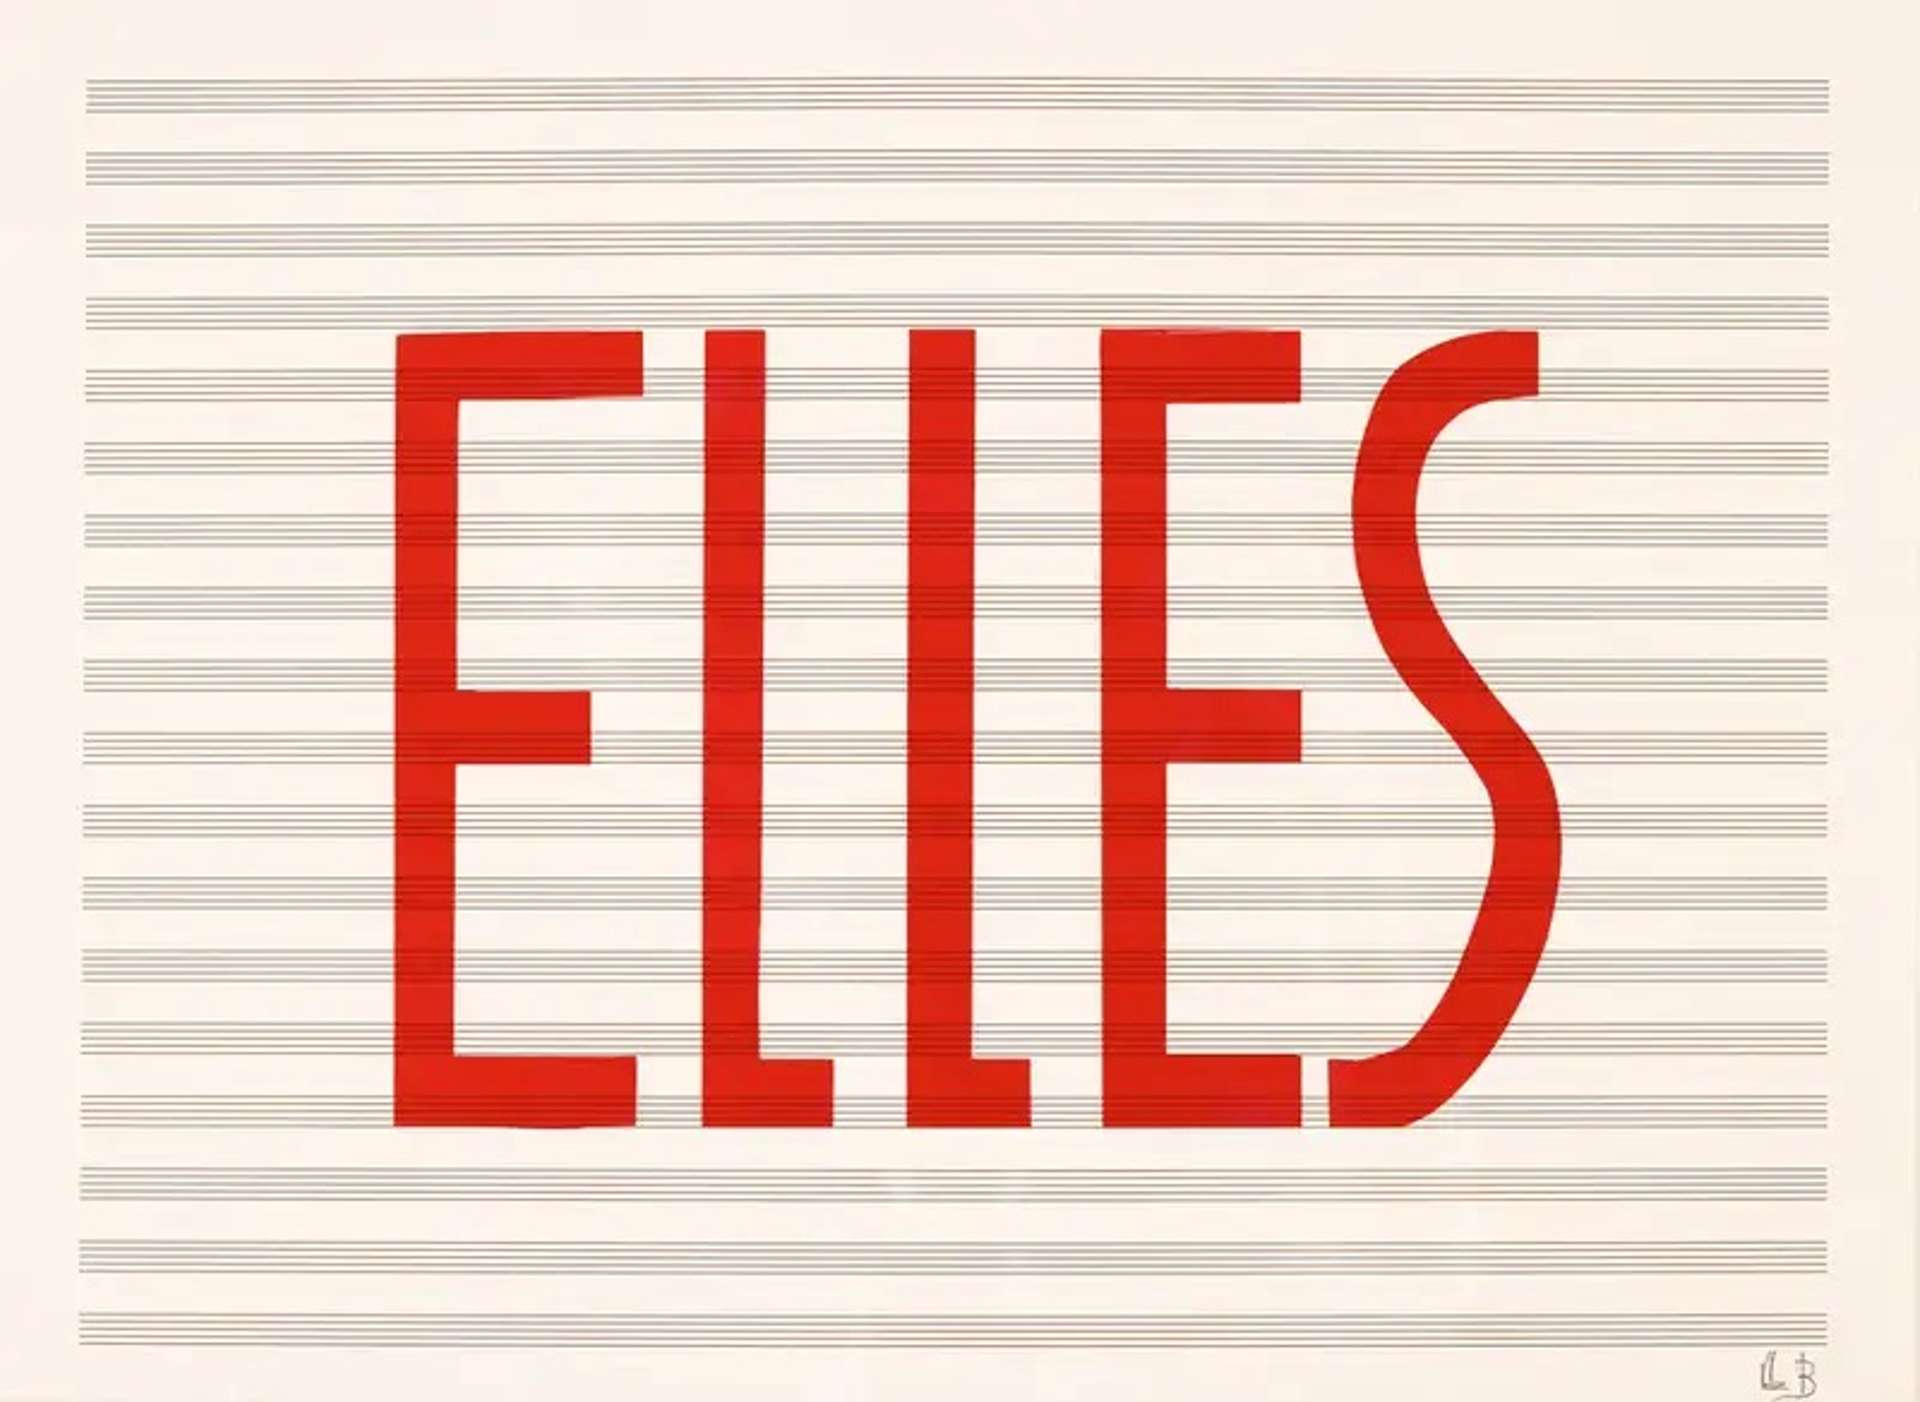 Louise Bourgeois’ Untitled #6. A screenprint of the word “ELLE” in red against a sheet of horizontal lines.Louise Bourgeois’ Untitled #6. A screenprint of the word “ELLE” in red against a sheet of horizontal lines.